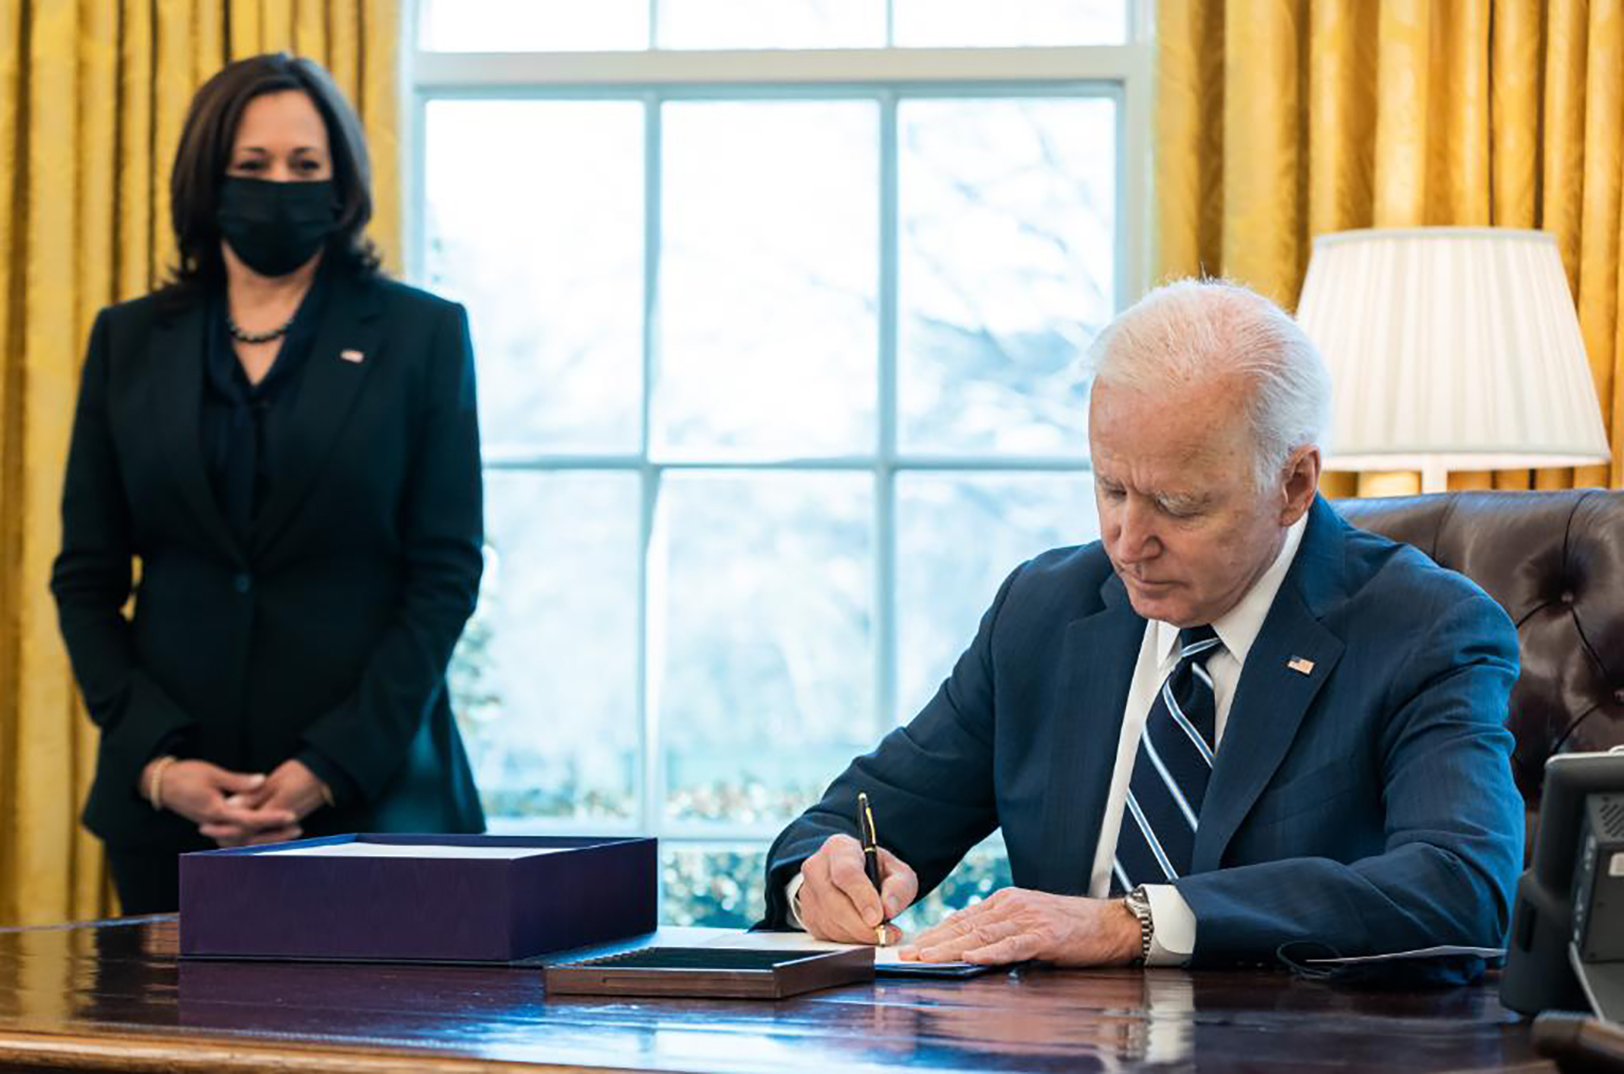 Kauffman Foundation: $1.9T relief plan signed by Biden a ‘significant step,’ but challenges linger beyond bill’s scope